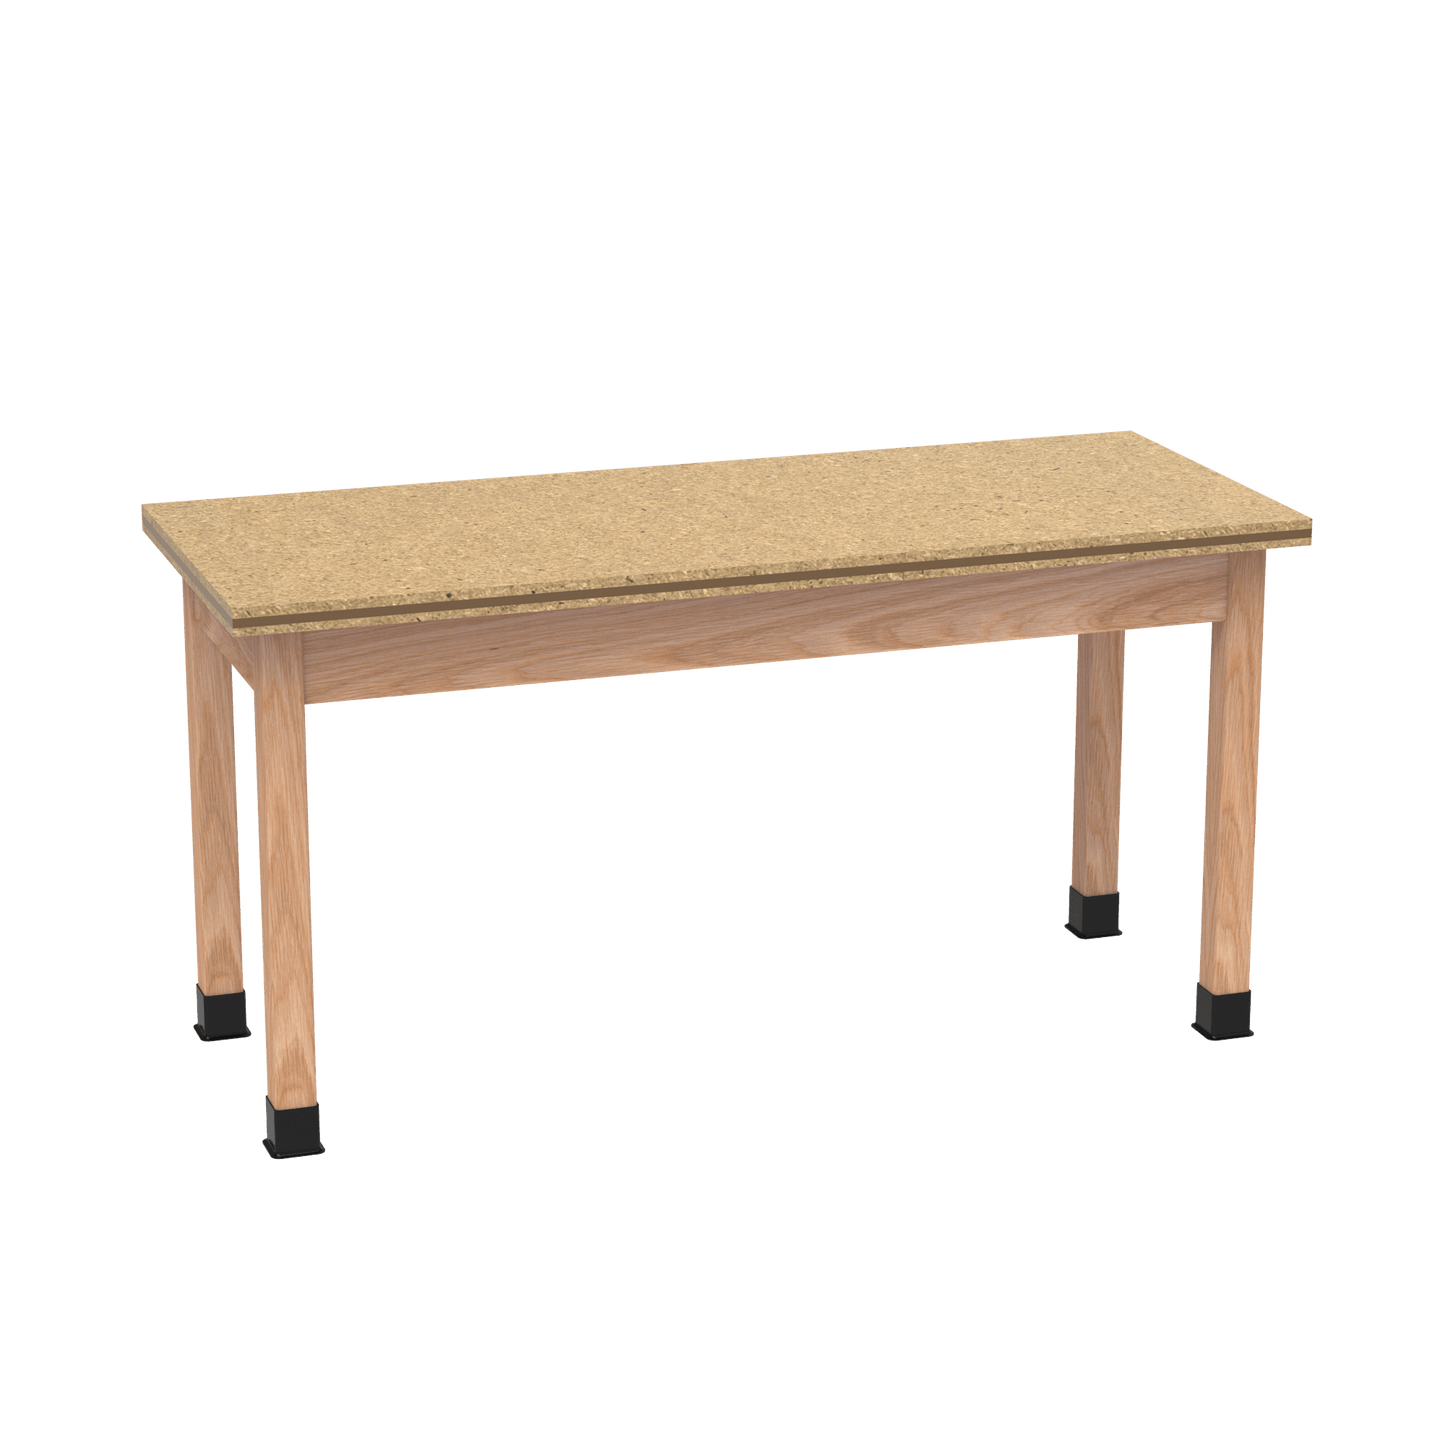 Diversified Woodcrafts Science Table - Plain Apron - 60" W x 36" D - Solid Wood Frame and Adjustable Glides - SchoolOutlet